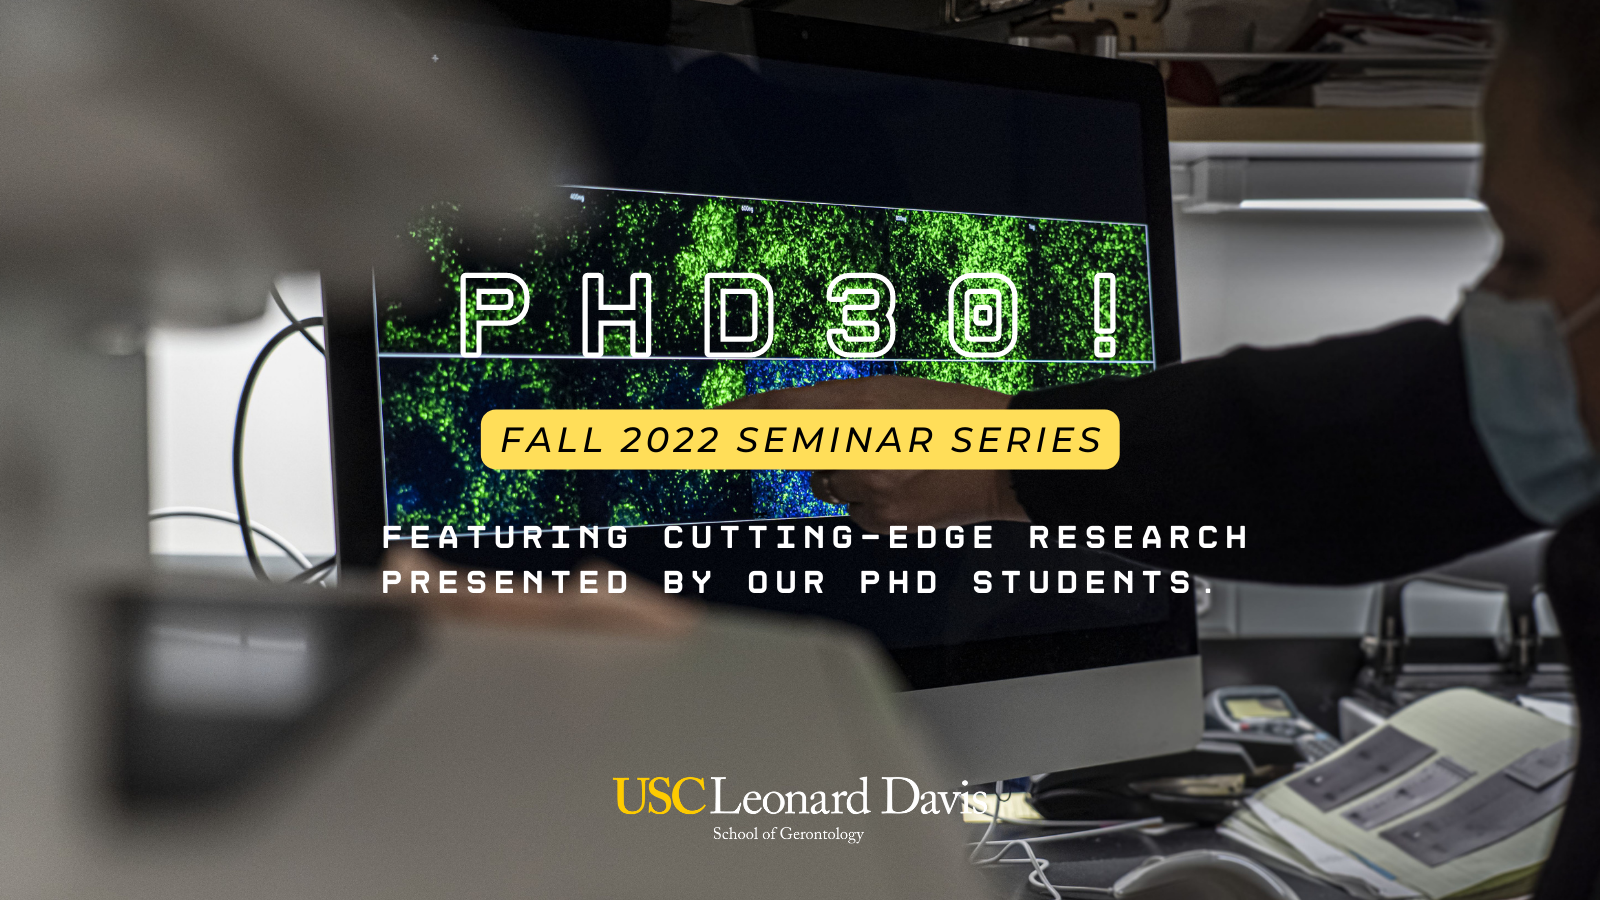 Flyer for Fall 2022 PhD30! Seminar Series with image of computer screen in a lab